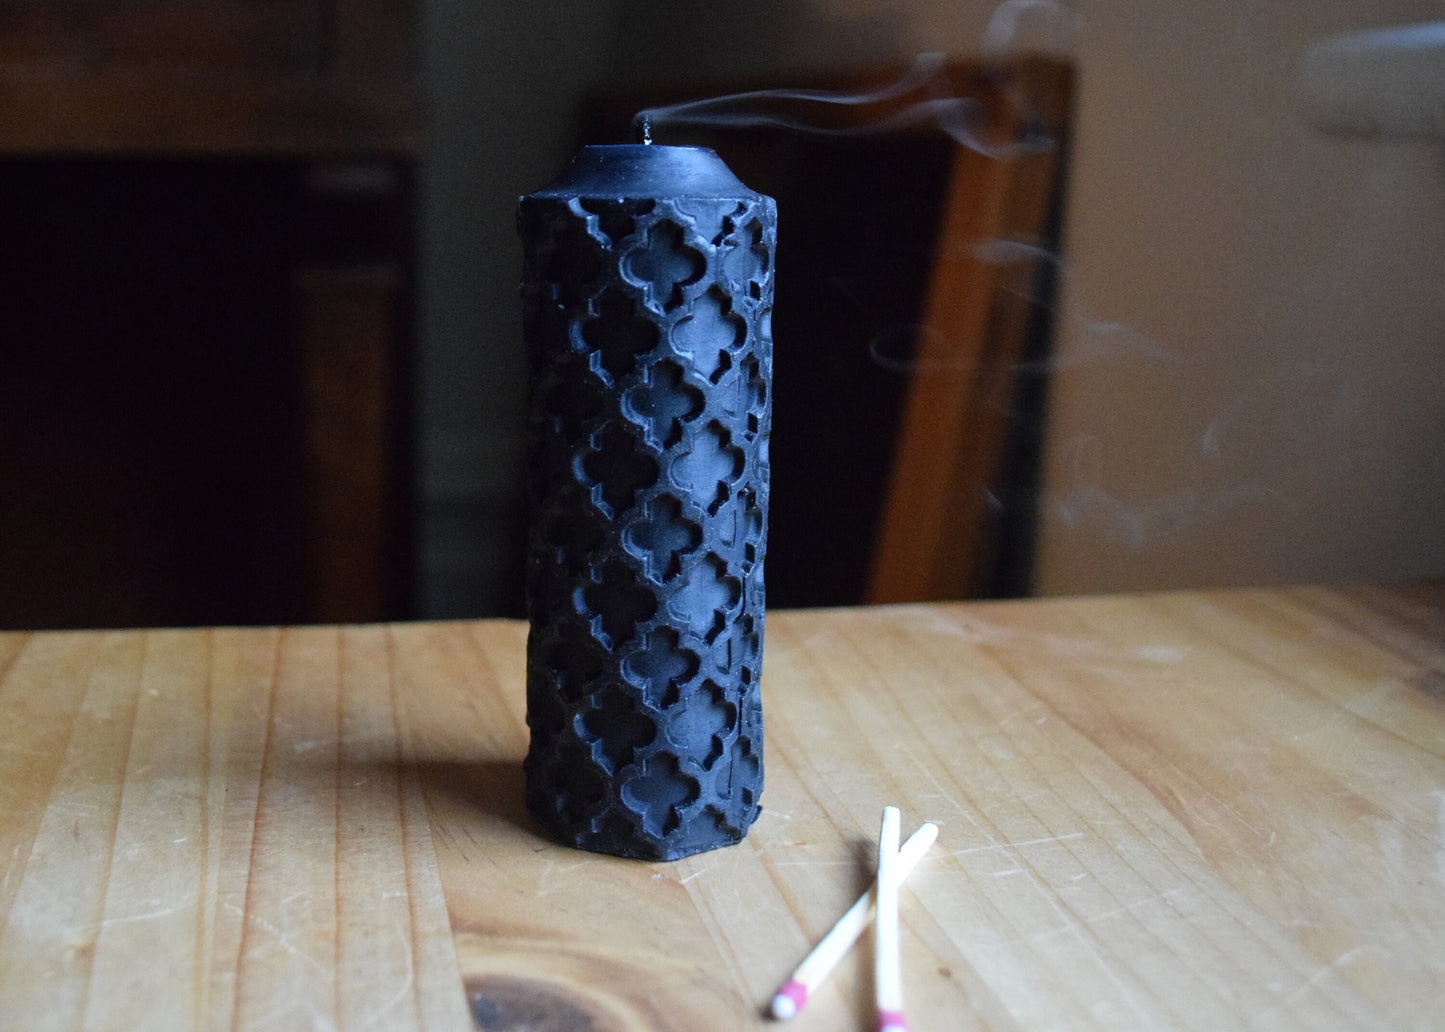 Black Beeswax Candle / Black, Candle, Beeswax- One Beeswax Candle // Pillar Candle, Eco Friendly, Non Toxic